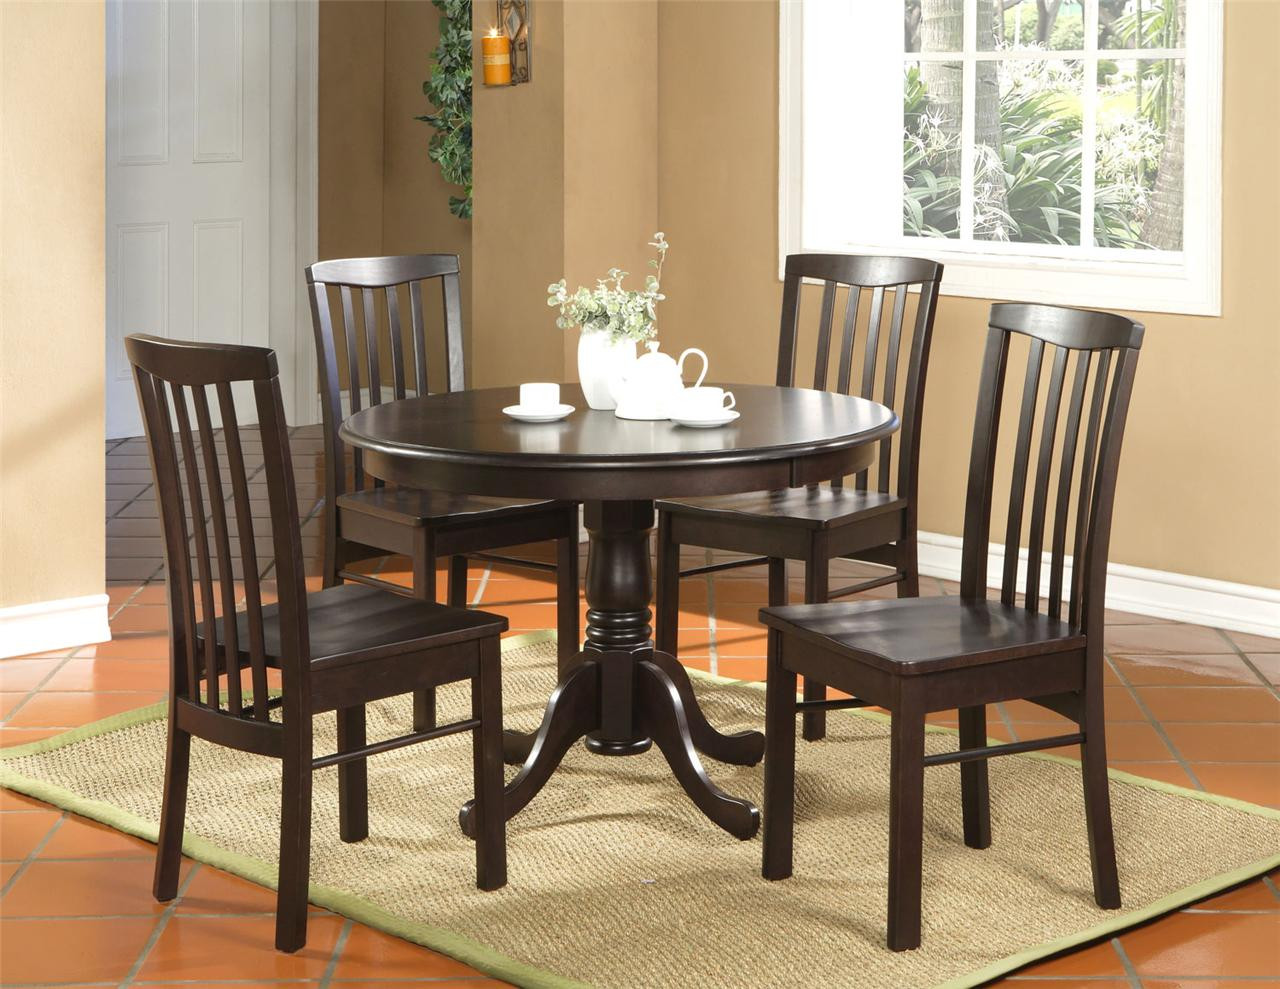 Small Kitchen Dinette Set
 5PC ROUND KITCHEN DINETTE SET TABLE AND 4 CHAIRS WALNUT